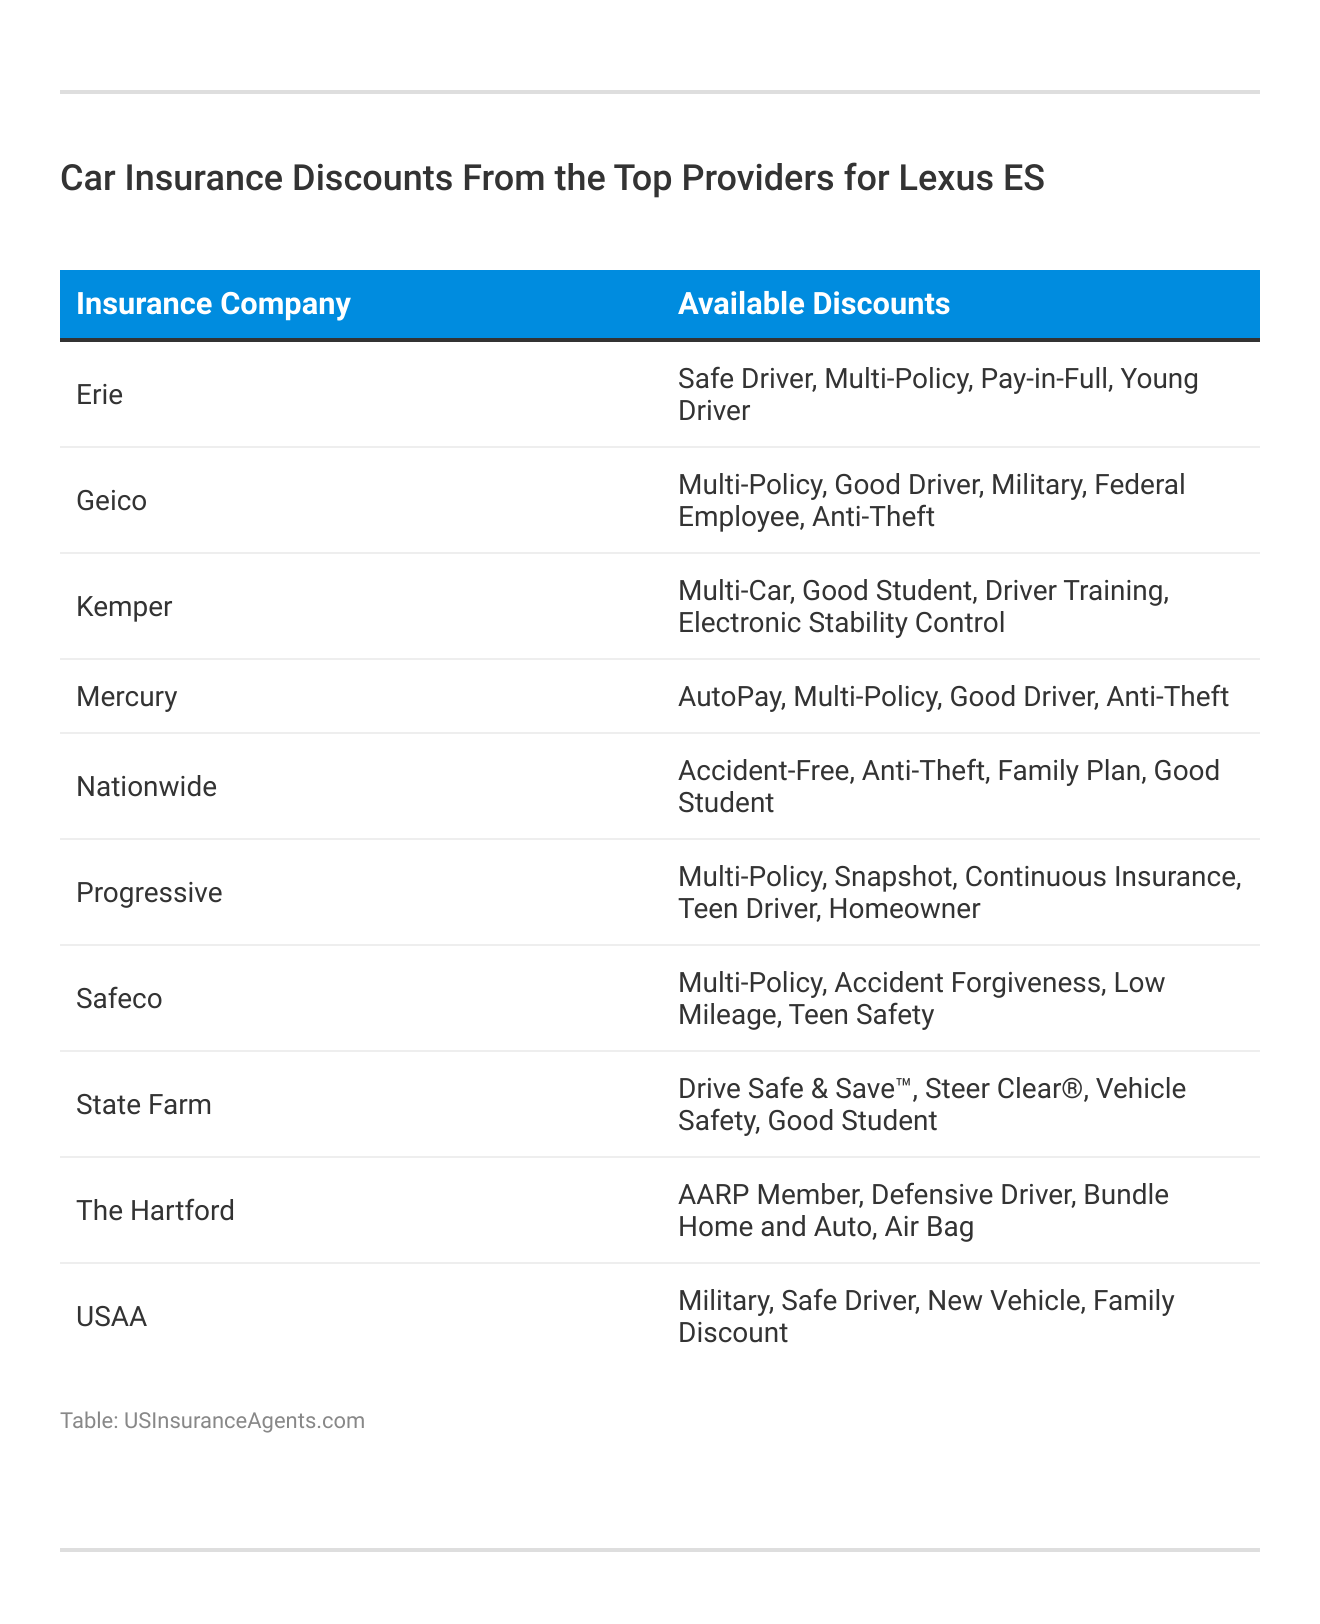 <h3>Car Insurance Discounts From the Top Providers for Lexus ES</h3>